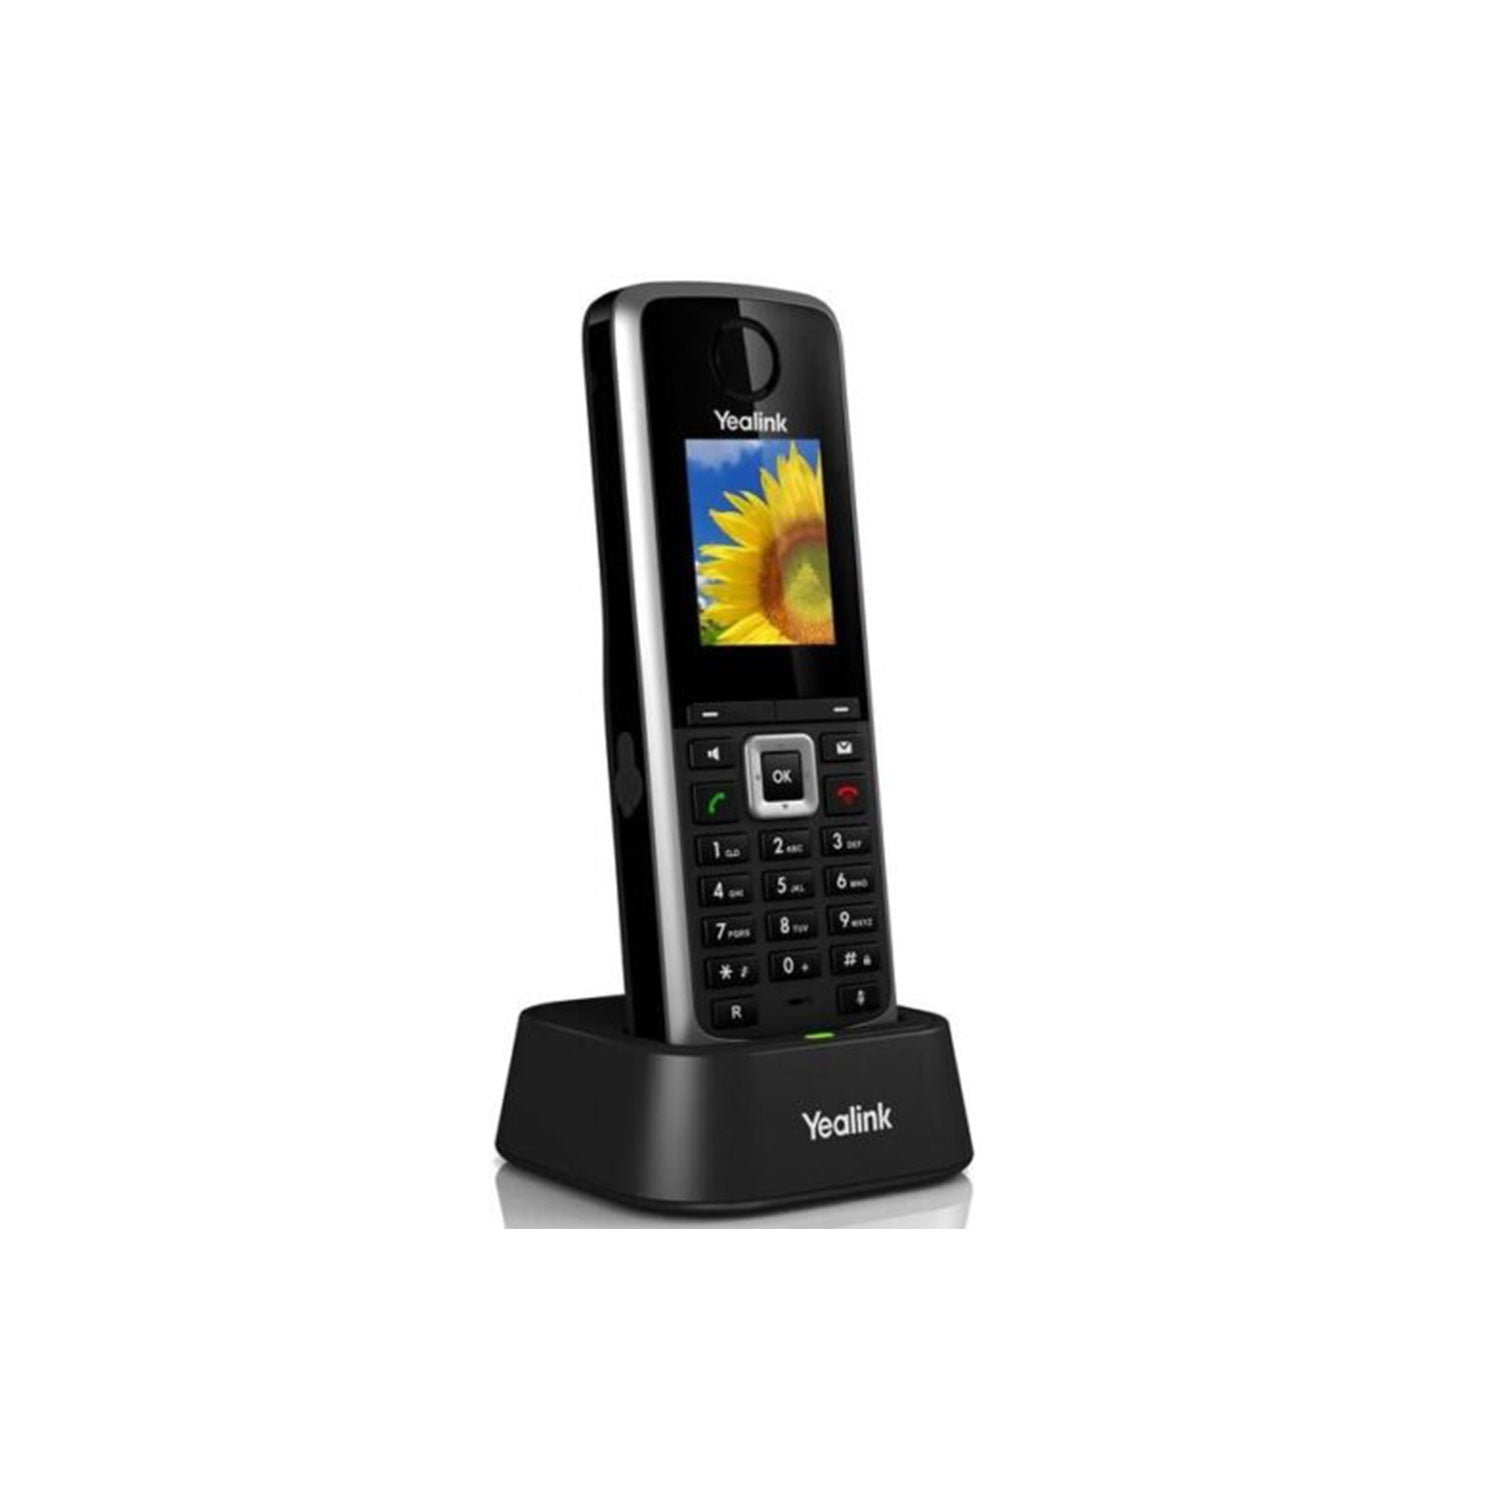 Yealink W52H Cordless DECT IP Phone, 1.8-Inch Color Display